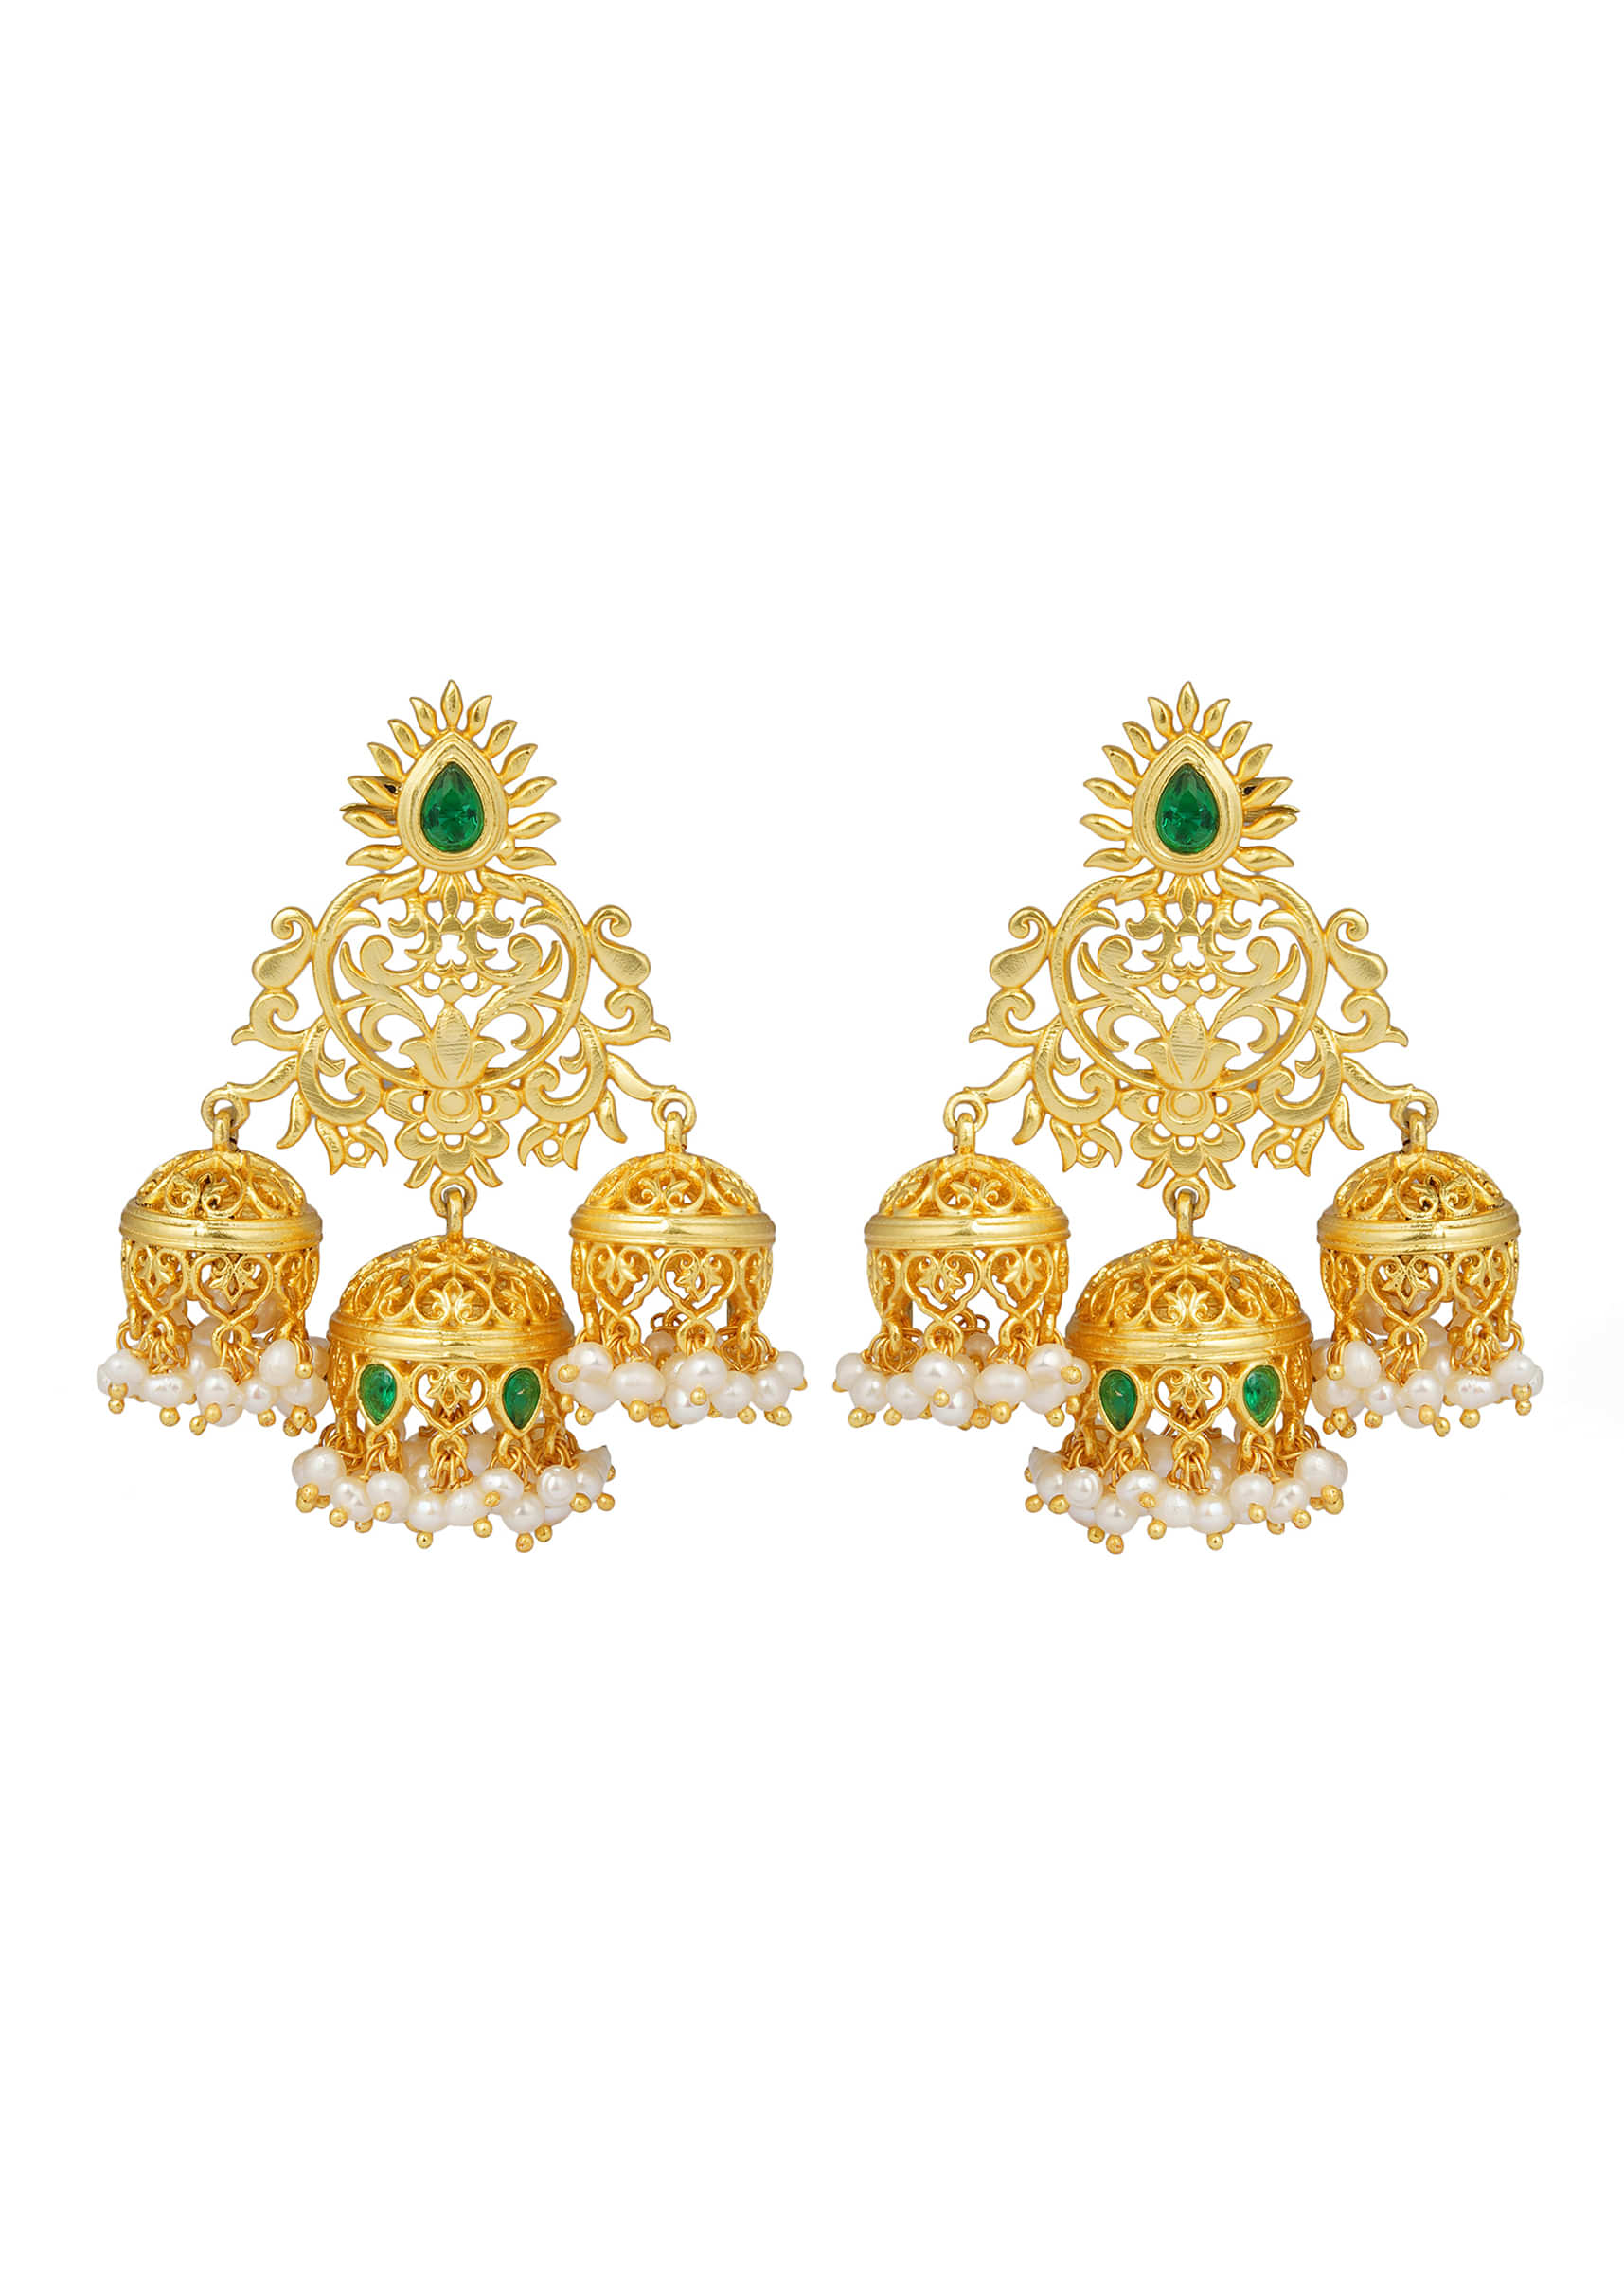 Gold Plated Earrings With Mini Jhumkas Edged In Moti And Delicate Filigree By Zariin